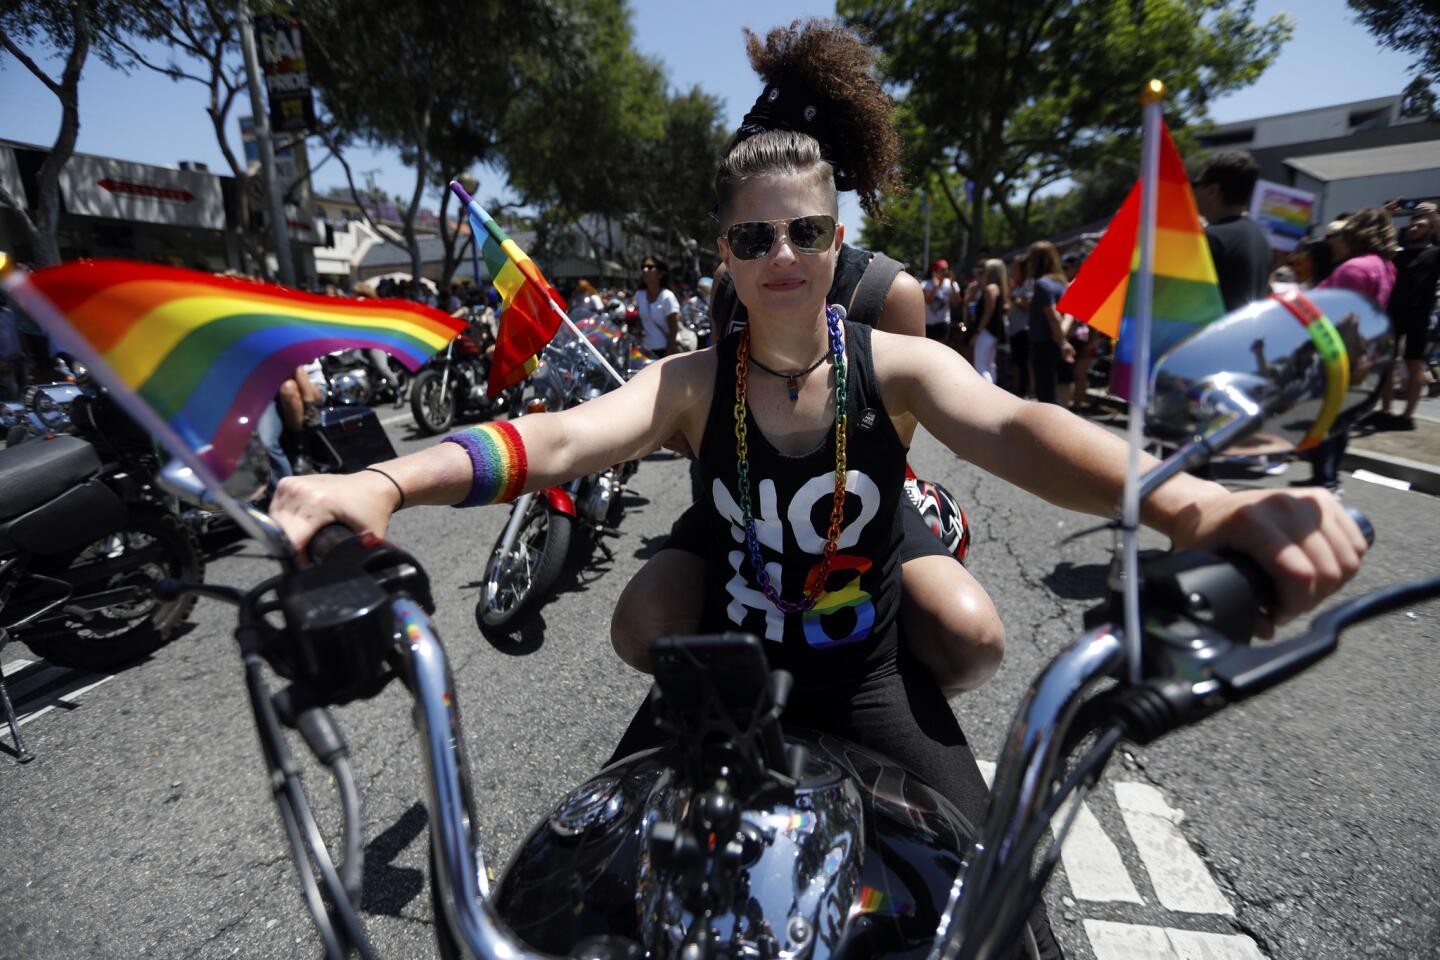 Katrina Vinson rides a motorcycle through West Hollywood in the annual LA Pride Parade on Sunday.